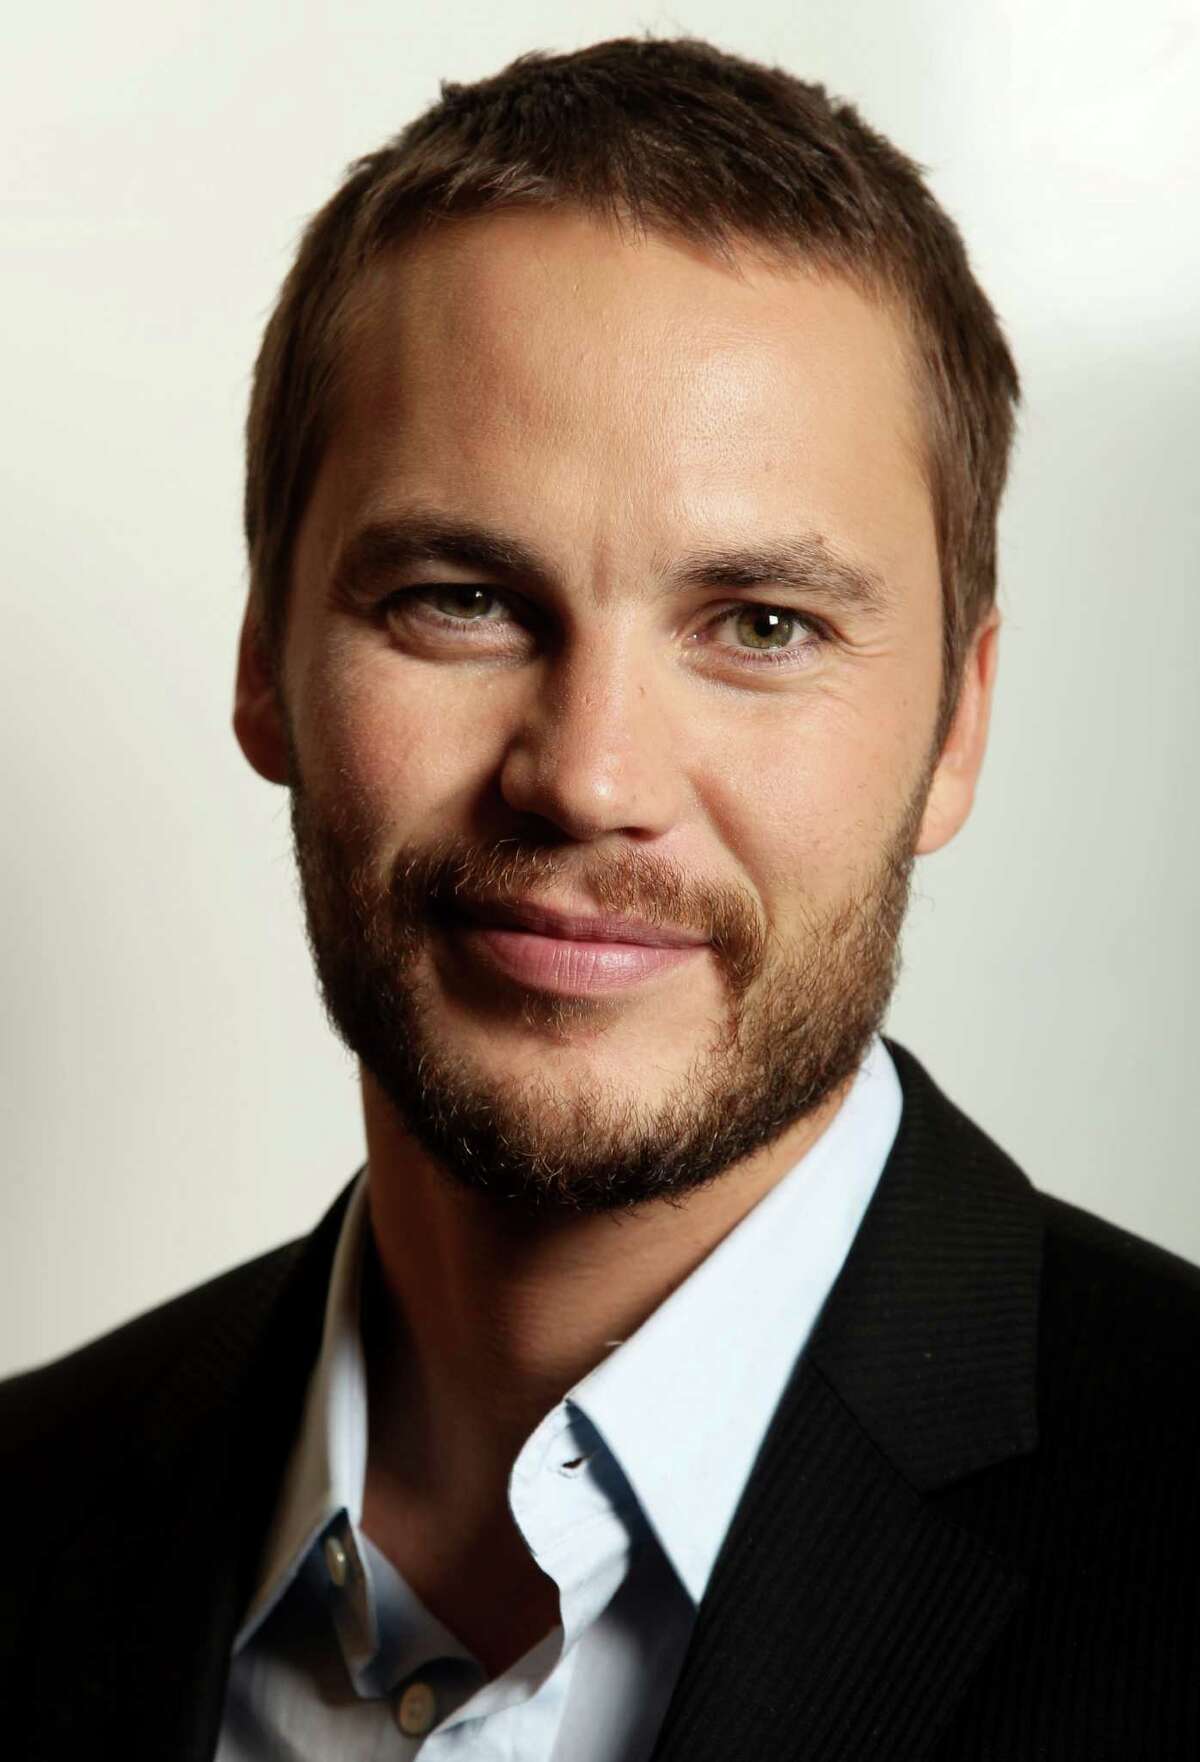 In this Friday, June 15, 2012 photo, actor, Taylor Kitsch, who appears in Oliver Stone's new film "Savages," poses for a portrait in Beverly Hills, Calif. Kitsch plays a California marijuana dealer in the movie, along with actor, Aaron Johnson, battling a vicious Mexican cartel that aims to take over their business growing primo weed. (Photo by Matt Sayles/Invision/AP)